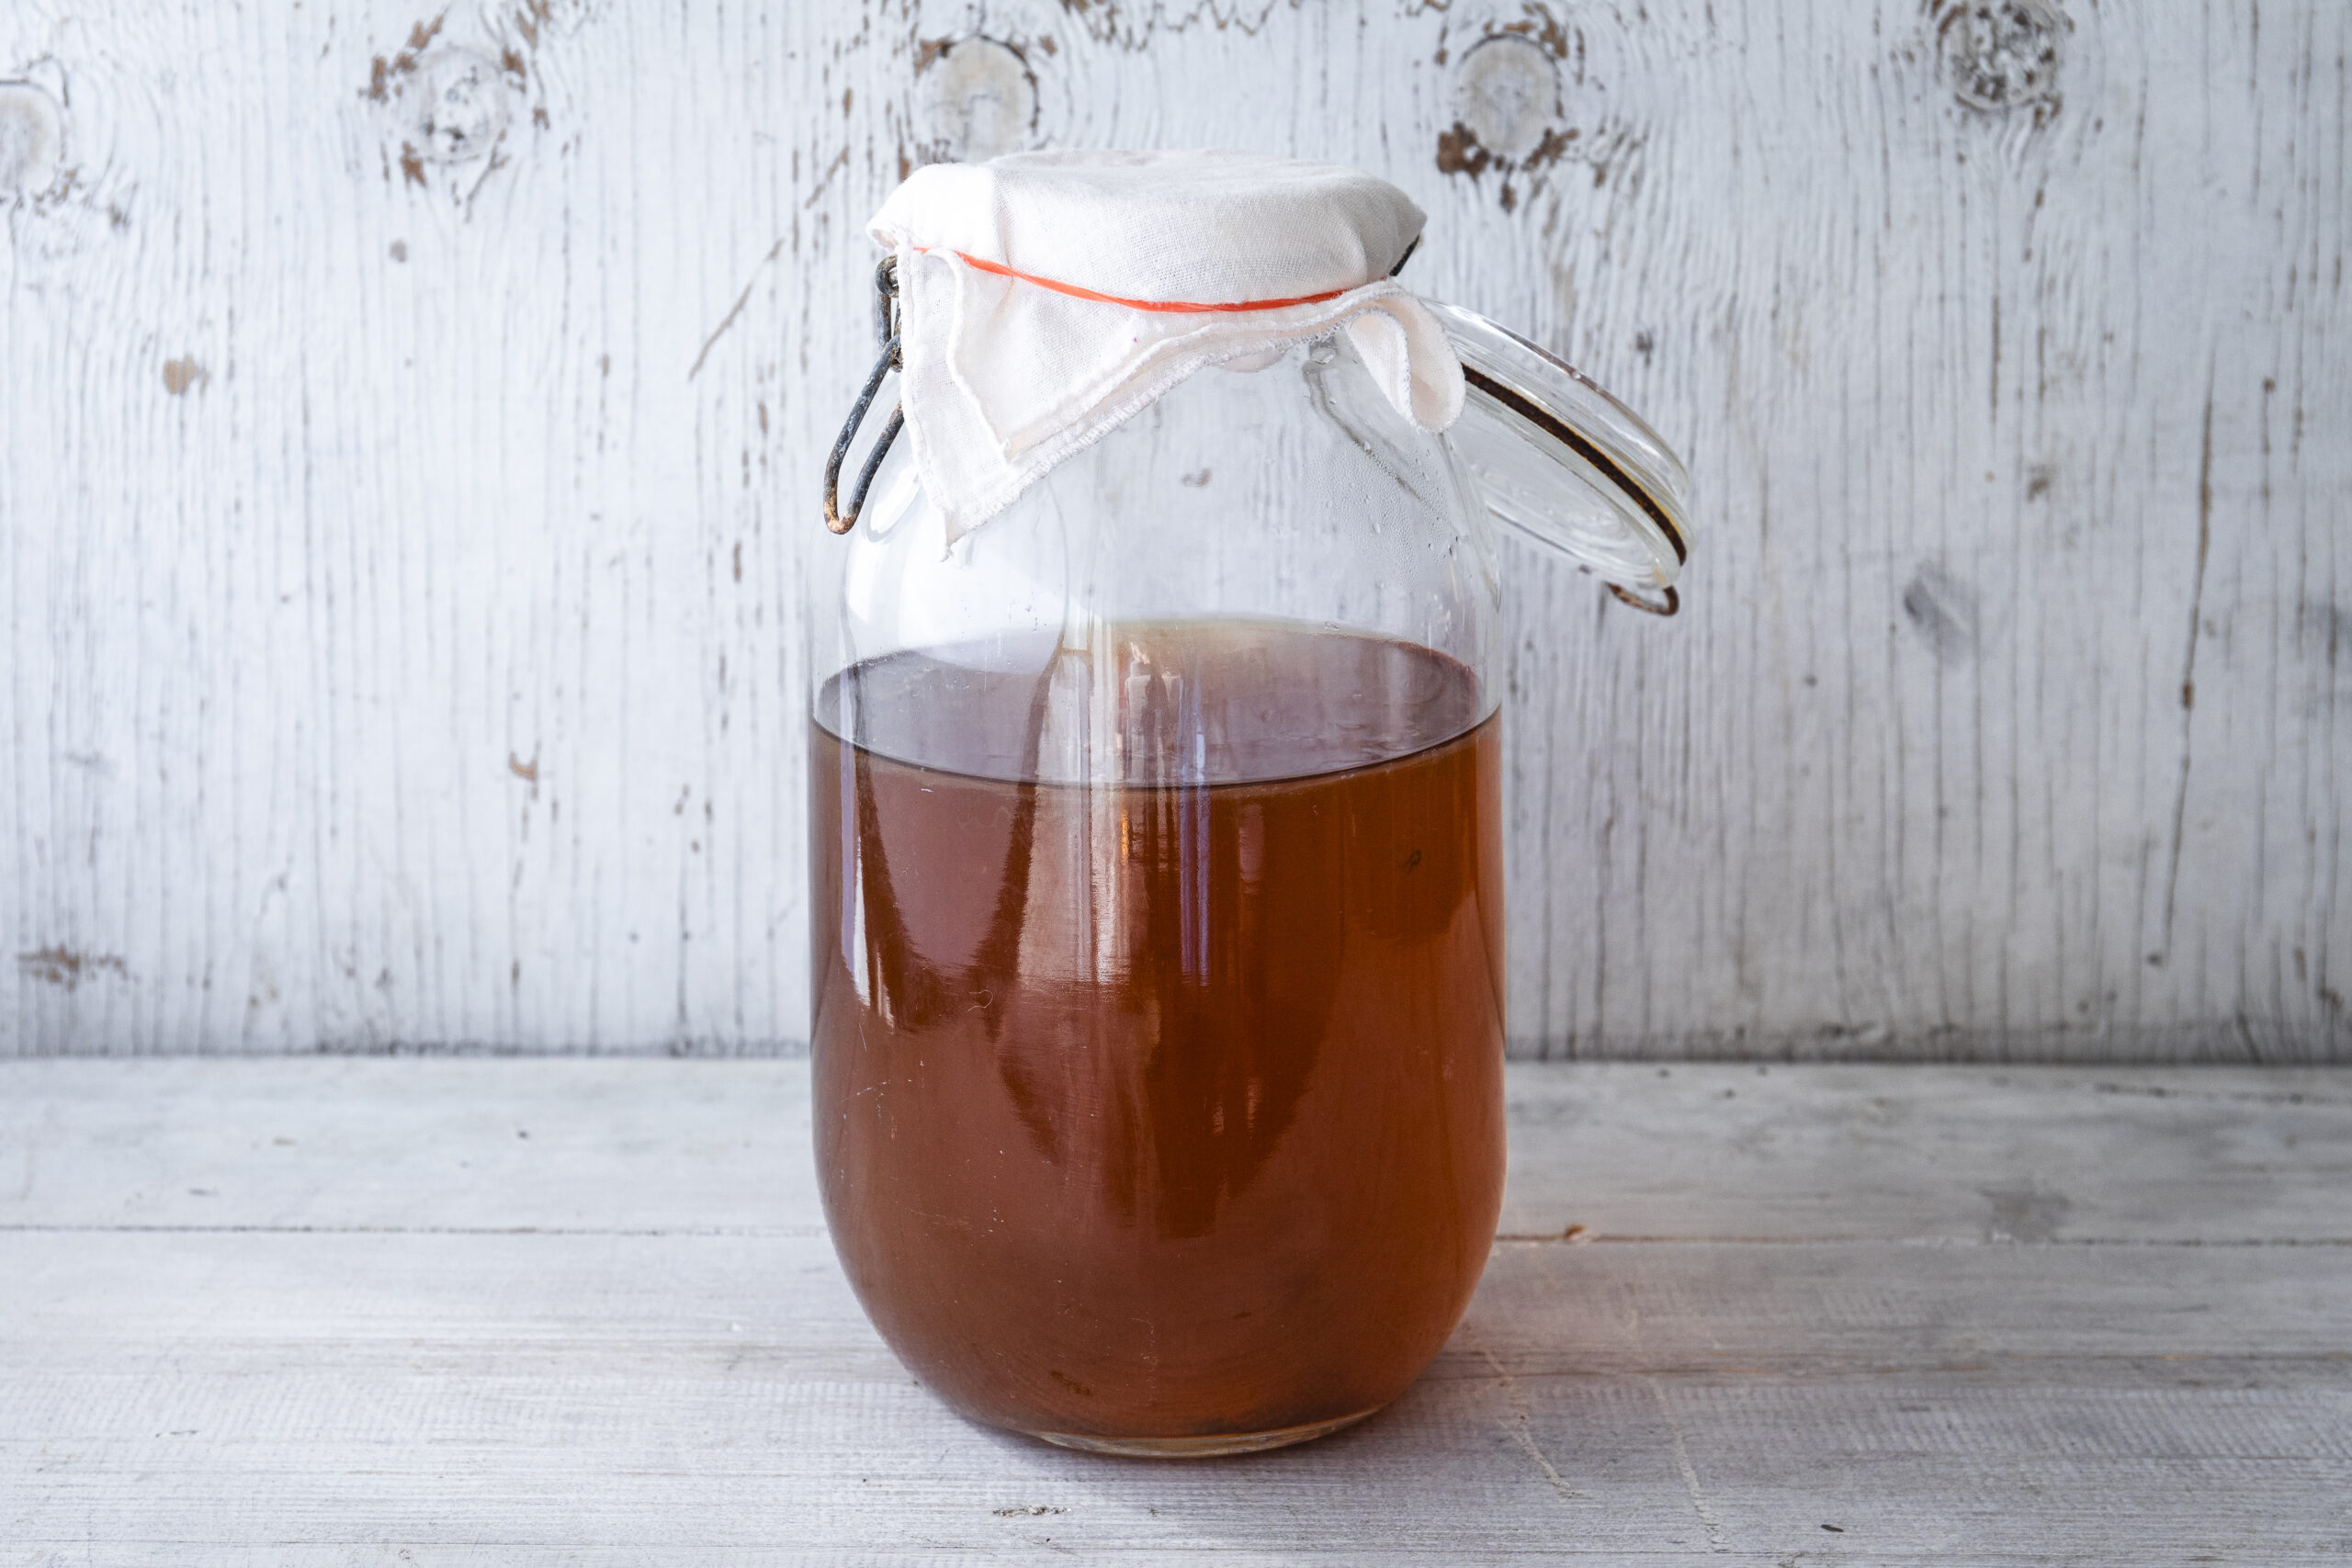 Remedy Kombucha College: Brew Your Own Booch at Home